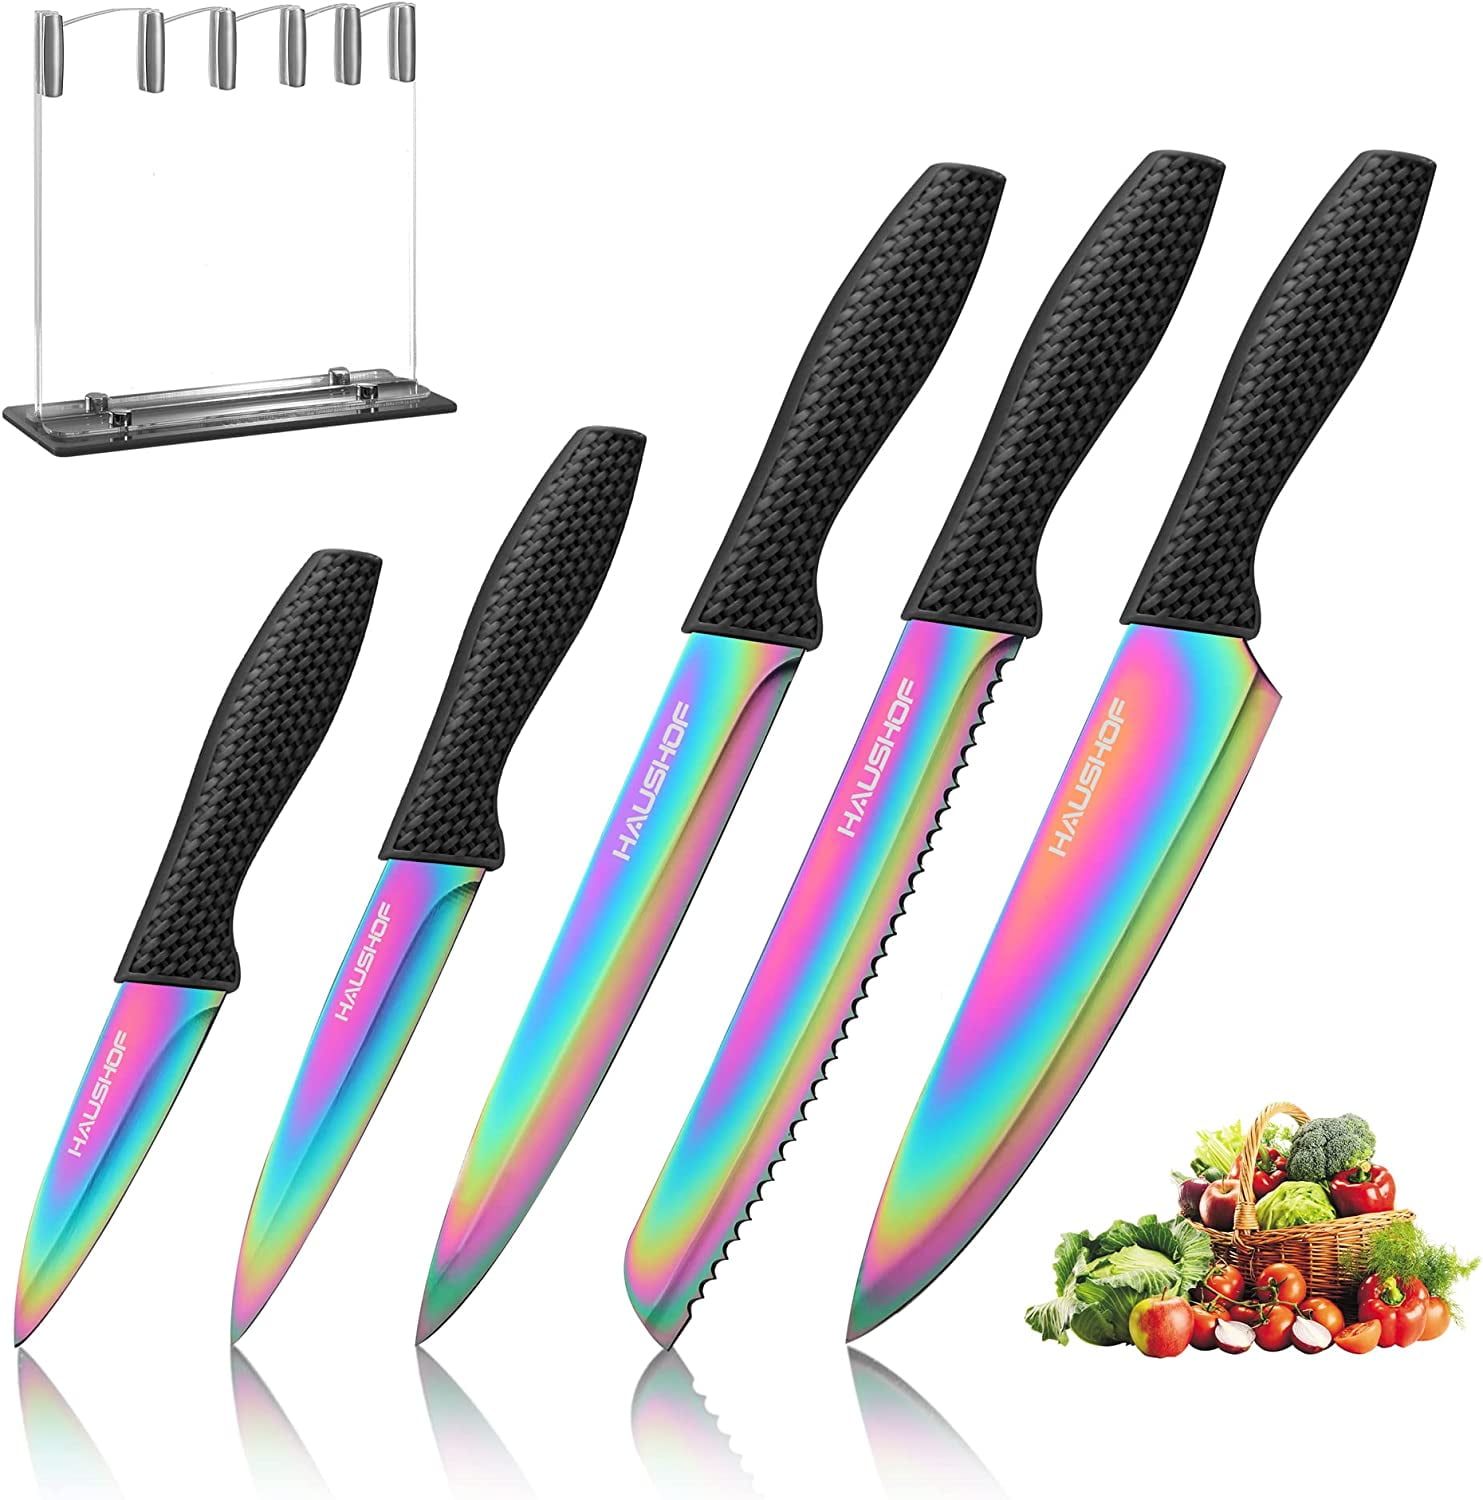 Shopmania 102 Kitchen Knife Set with Wooden Block and Scissors (5